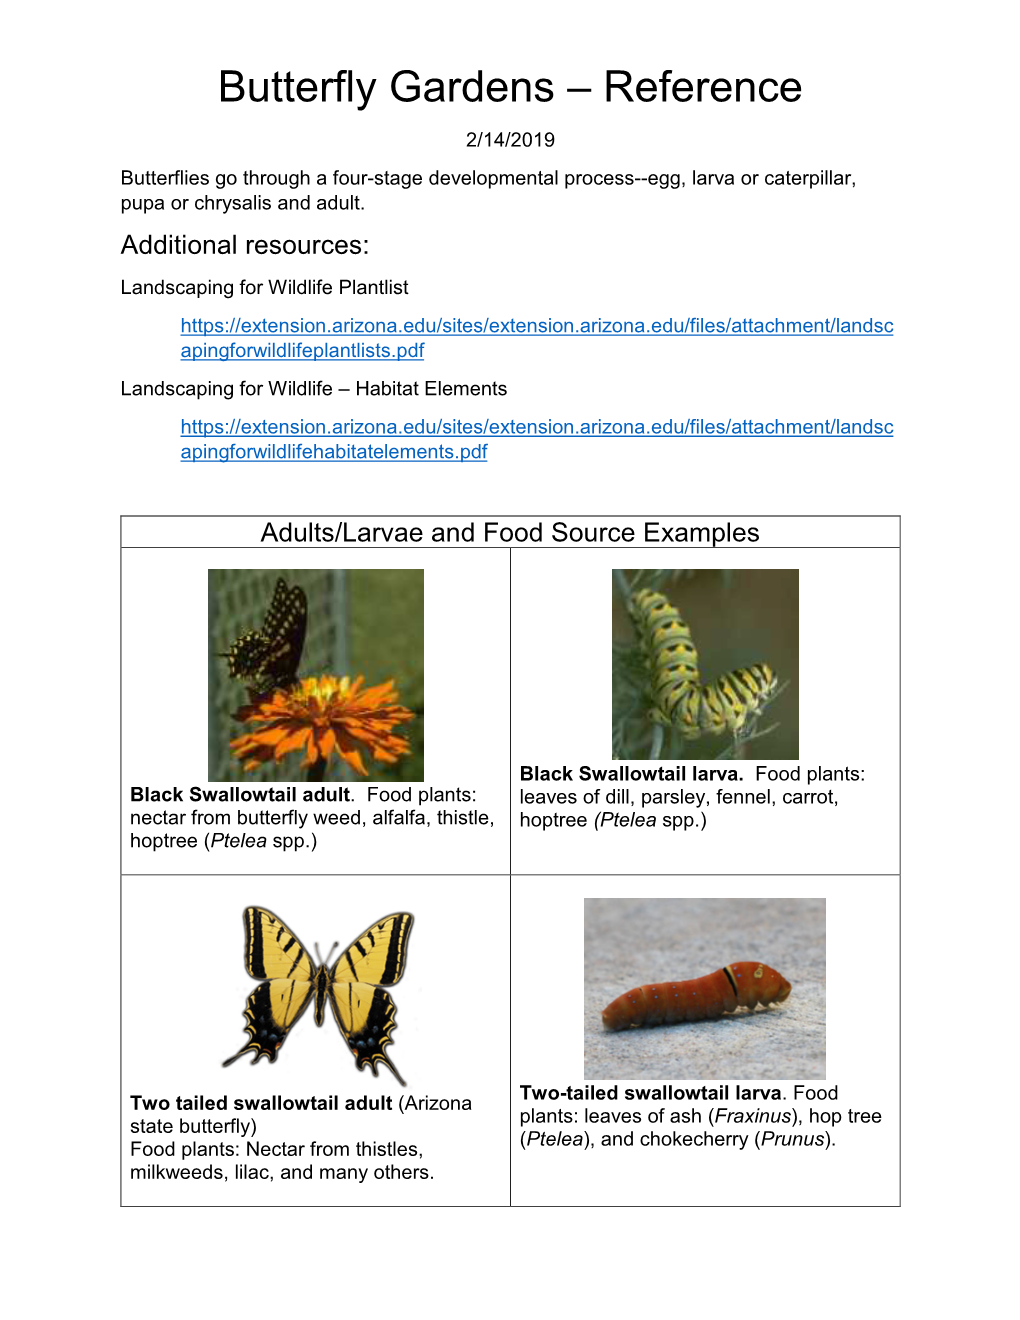 Butterfly Gardens – Reference 2/14/2019 Butterflies Go Through a Four-Stage Developmental Process--Egg, Larva Or Caterpillar, Pupa Or Chrysalis and Adult